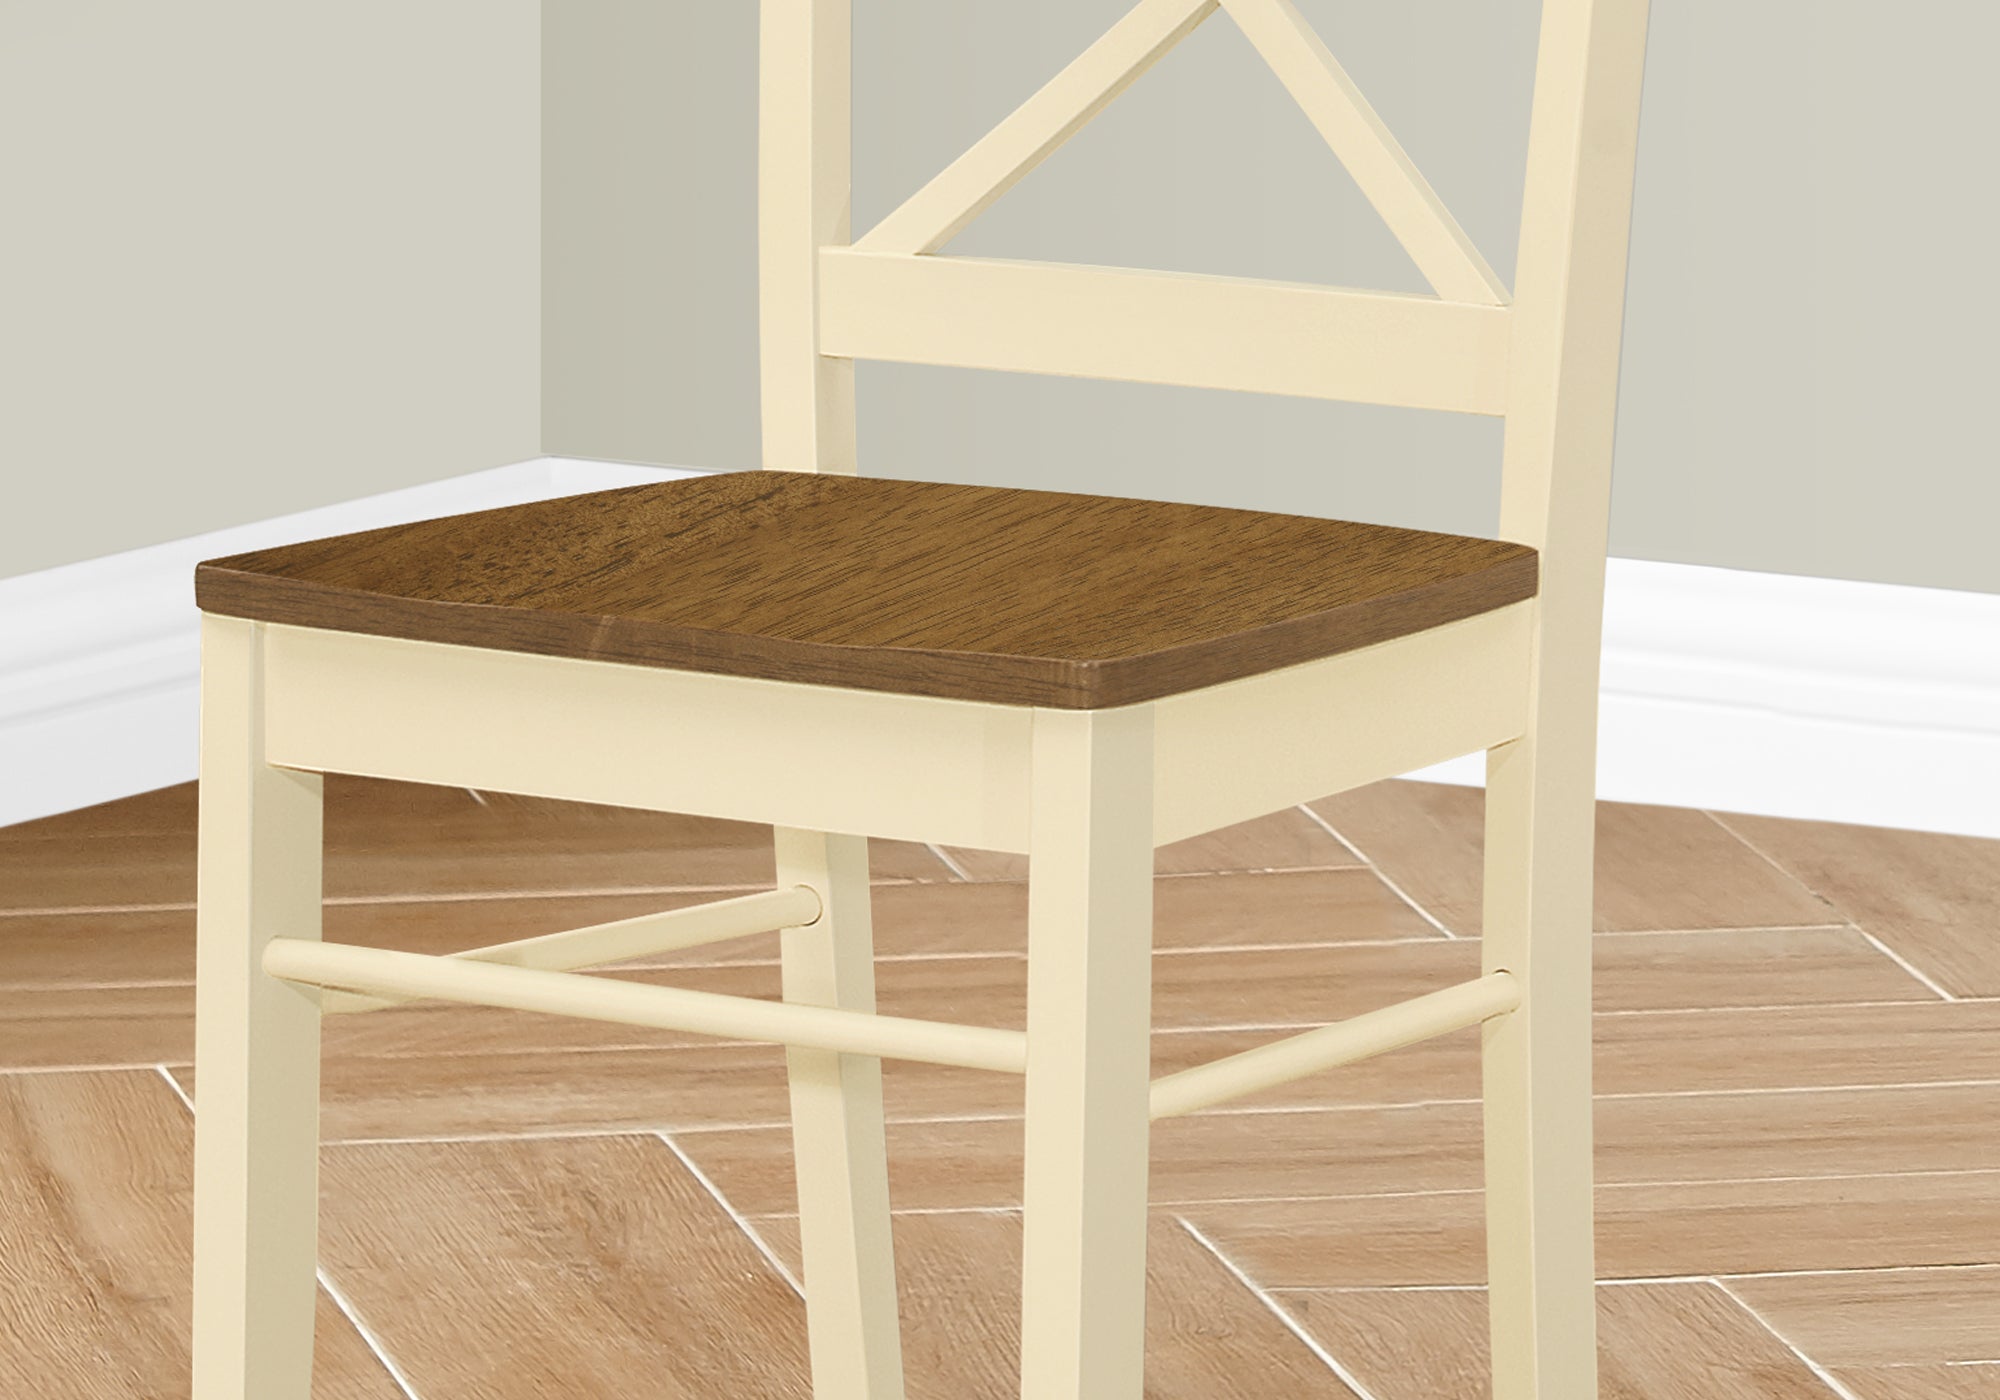 MN-231325    Dining Chair, Set Of 2, Side, Kitchen, Dining Room, Oak And Cream, Wood Legs, Transitional